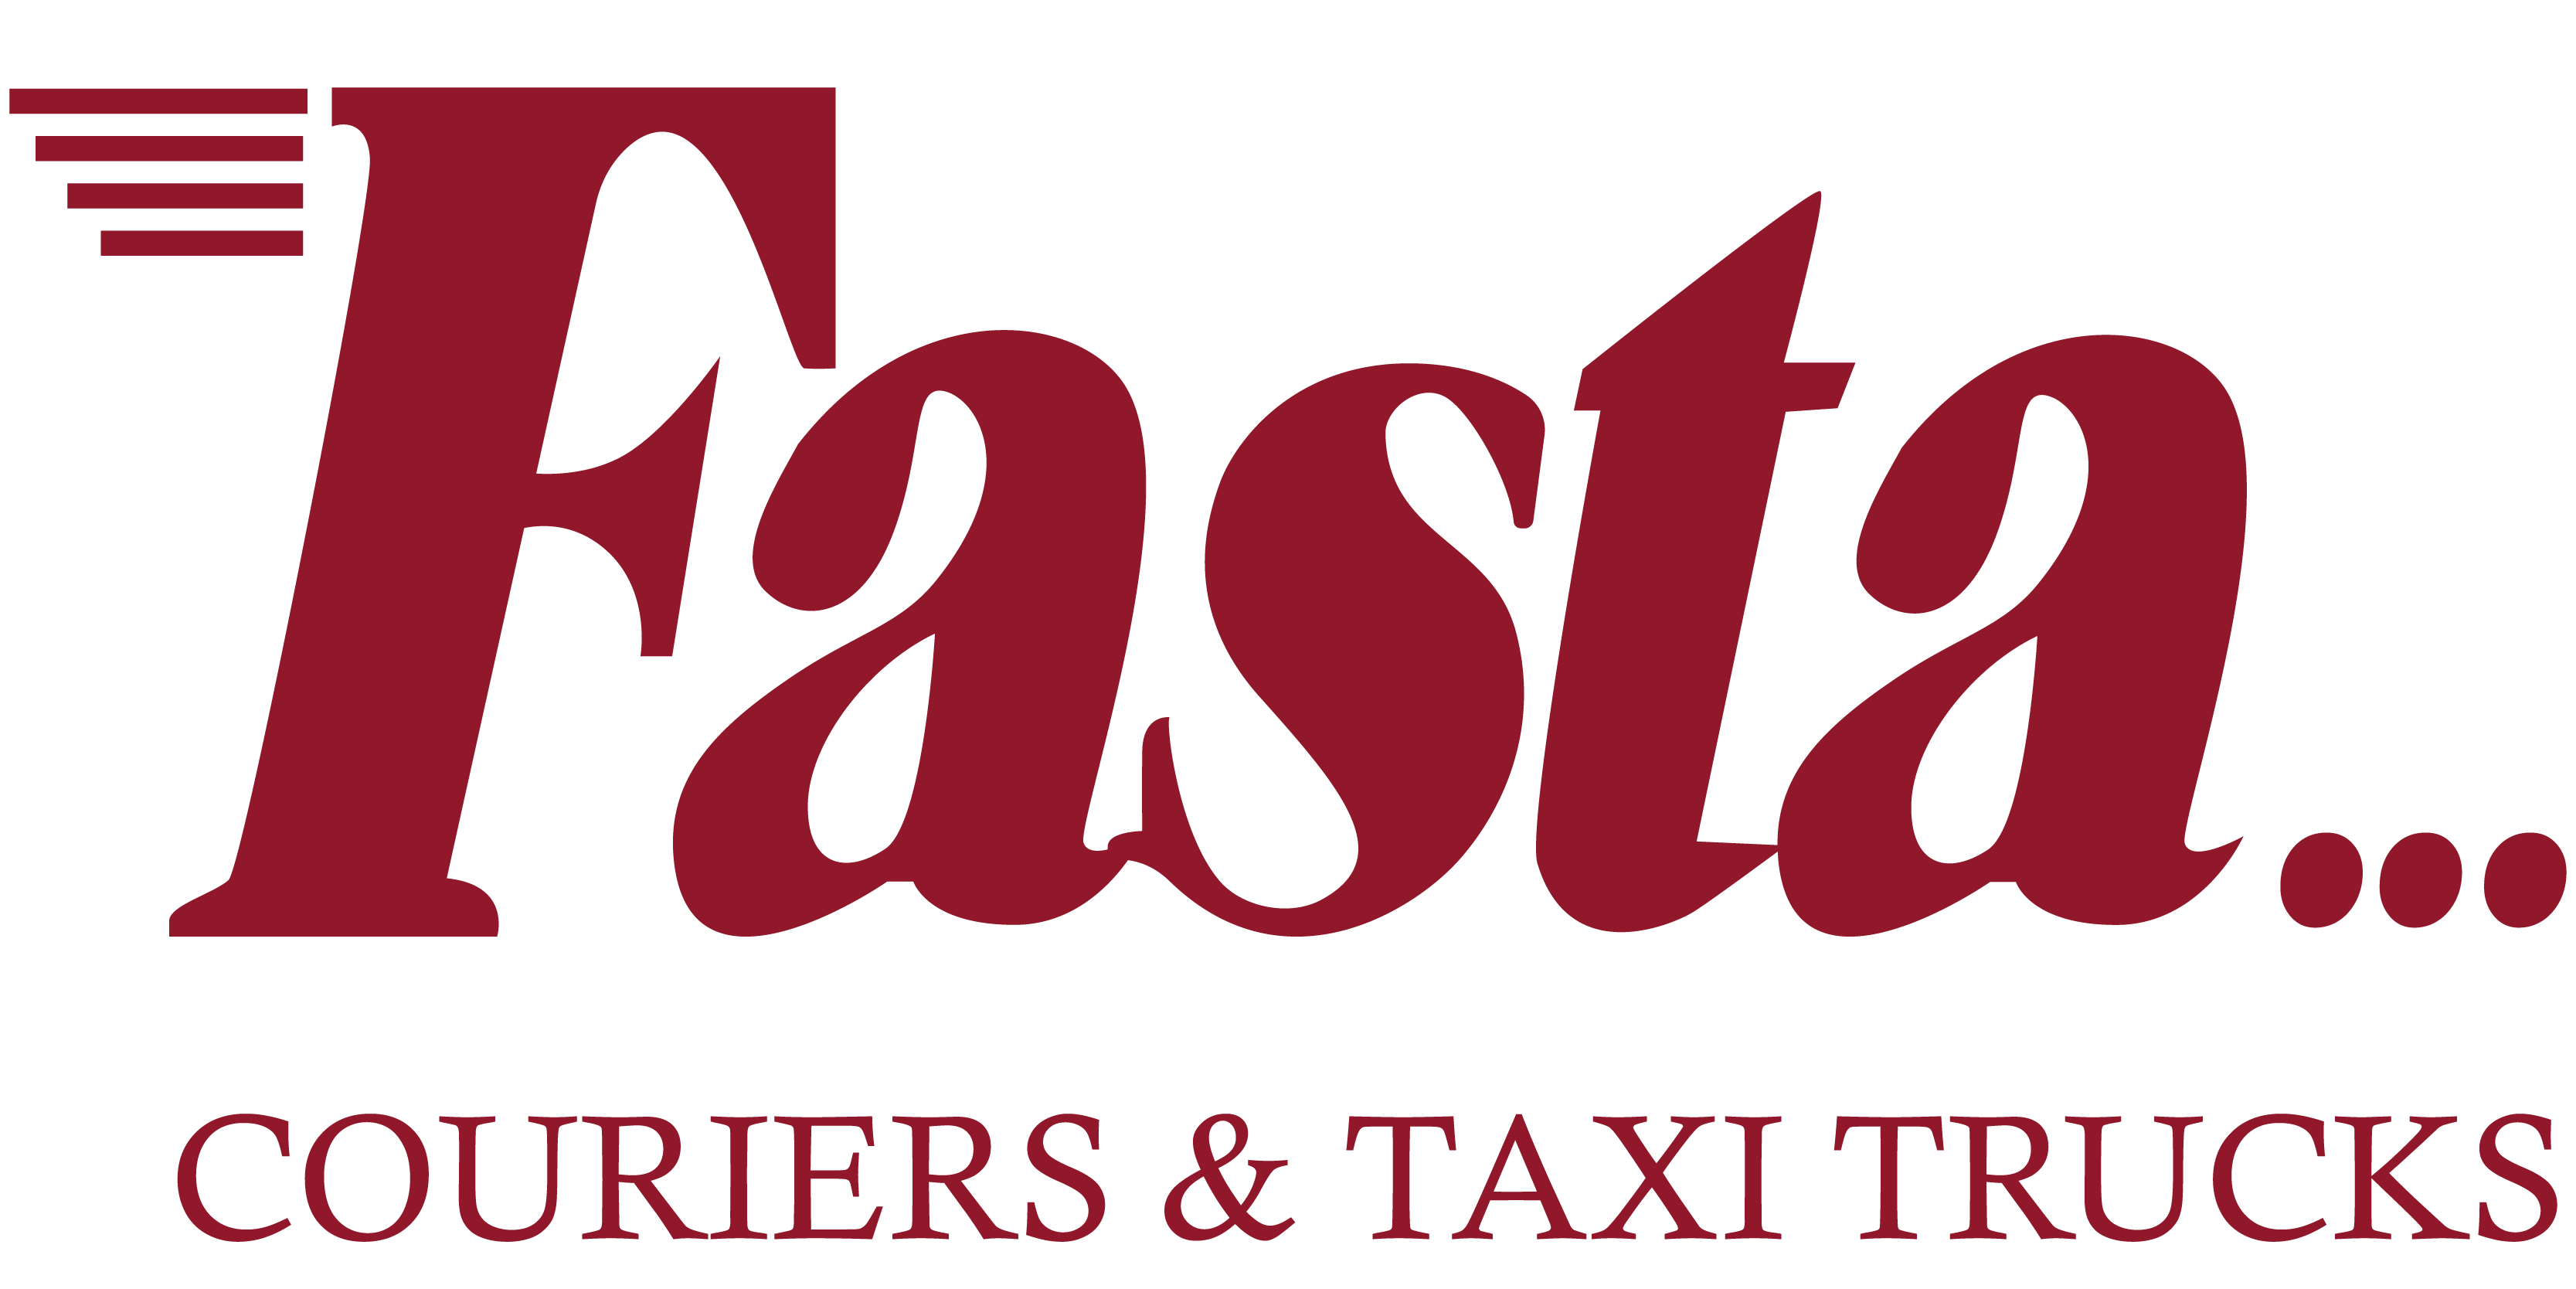 fasta couriers & taxi trucks